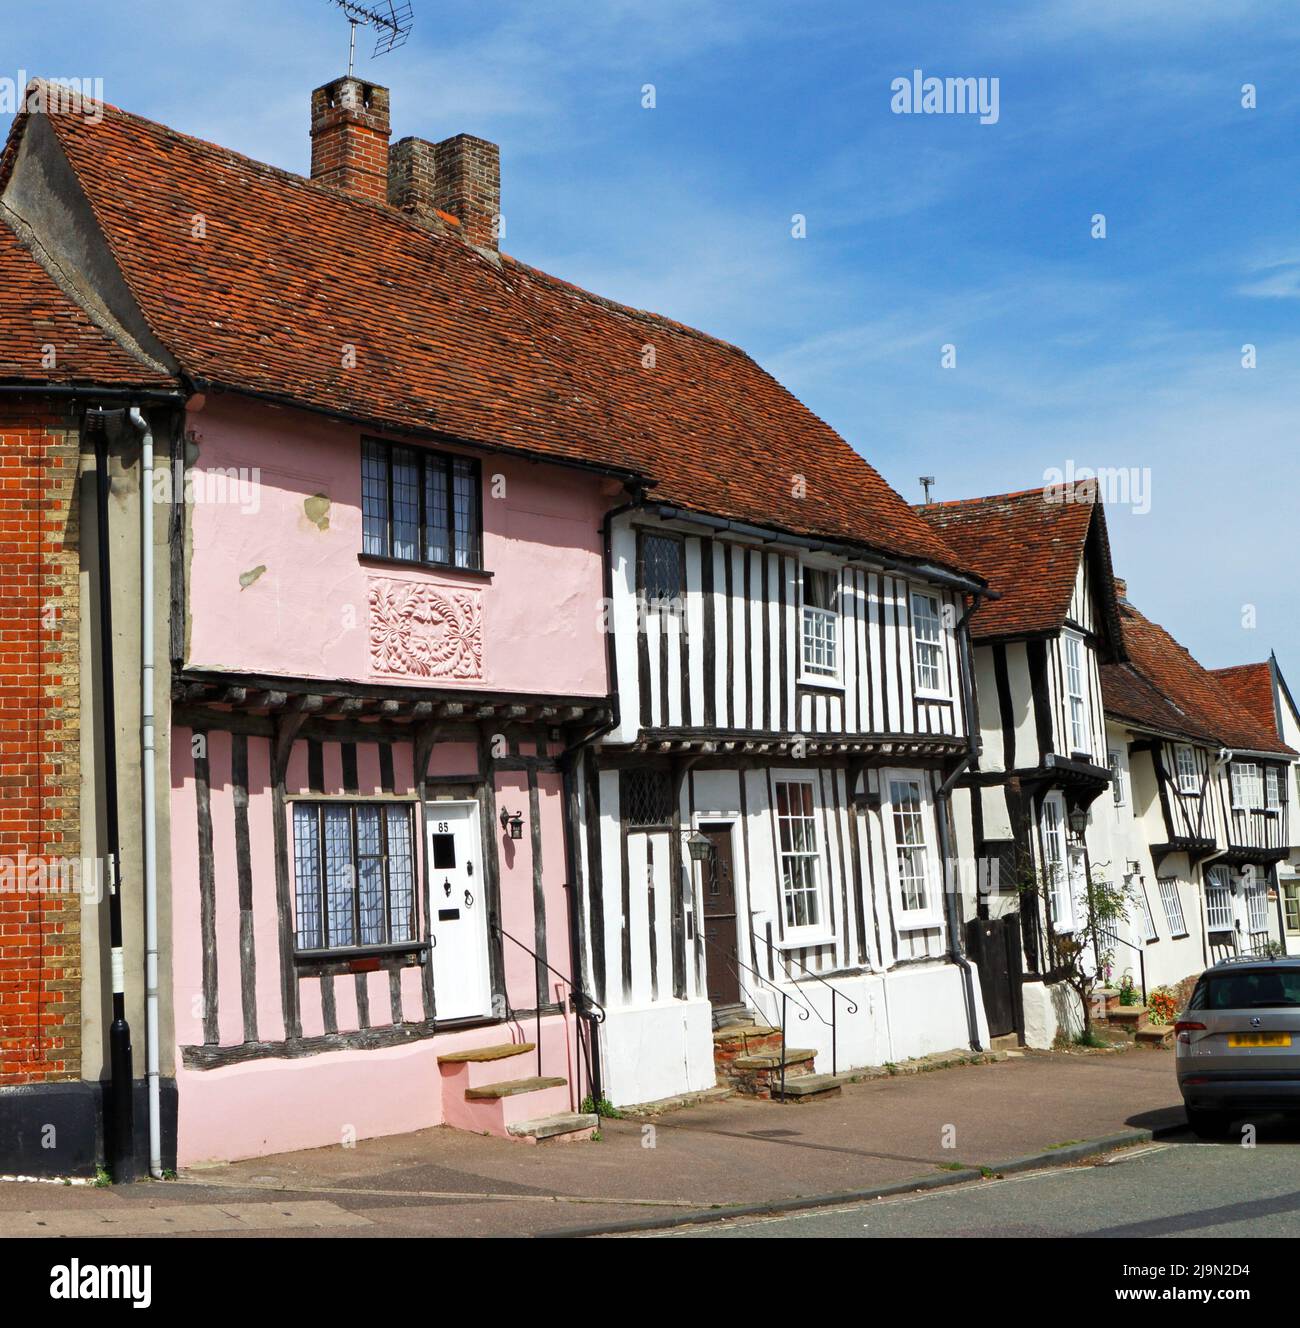 A view of medieval timber-framed buildings of C16-C17 origin in the well preserved medieval village of Lavenham, Suffolk, England, United Kingdom. Stock Photo